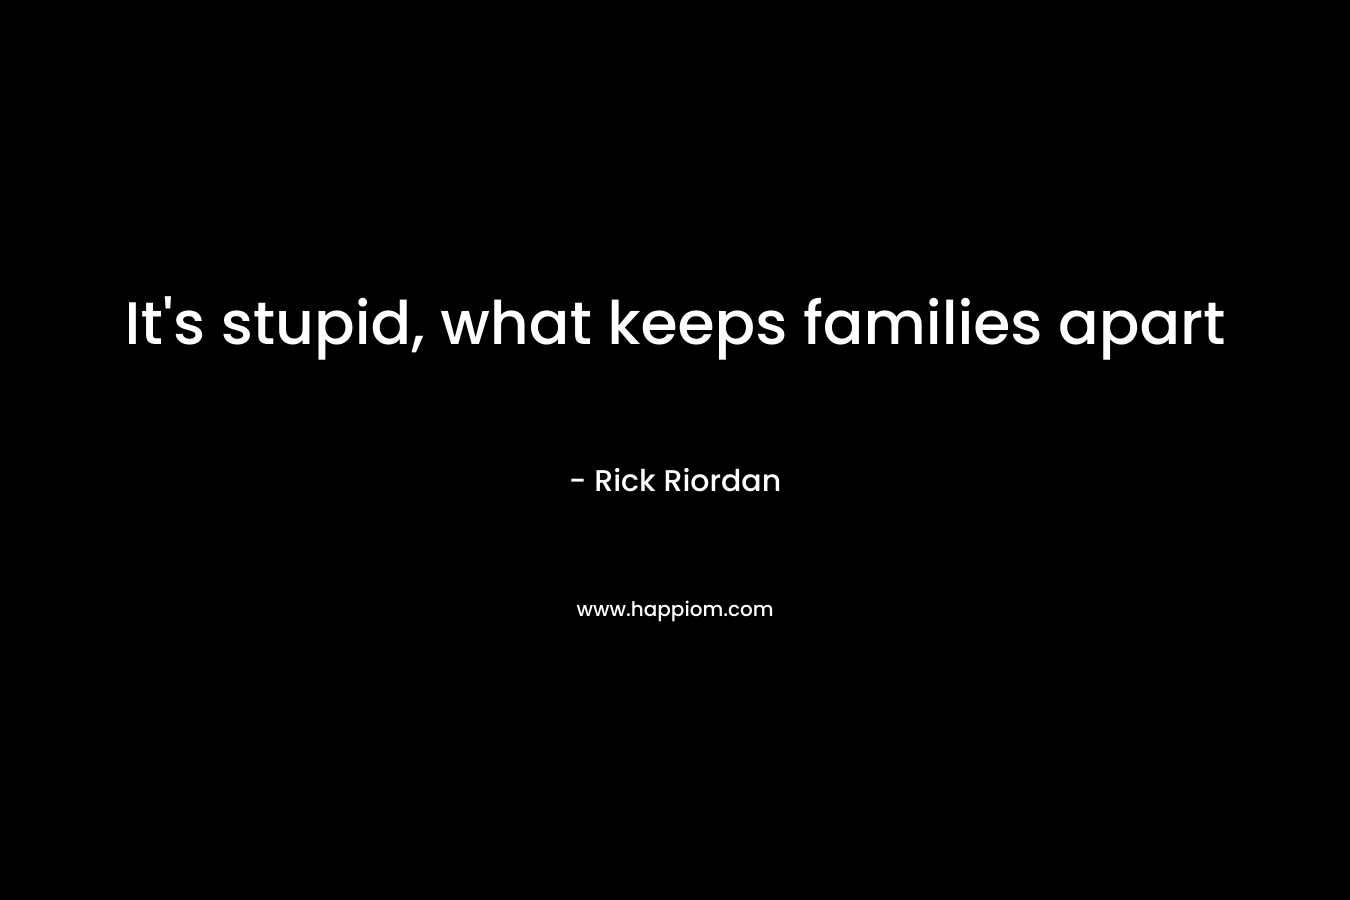 It's stupid, what keeps families apart